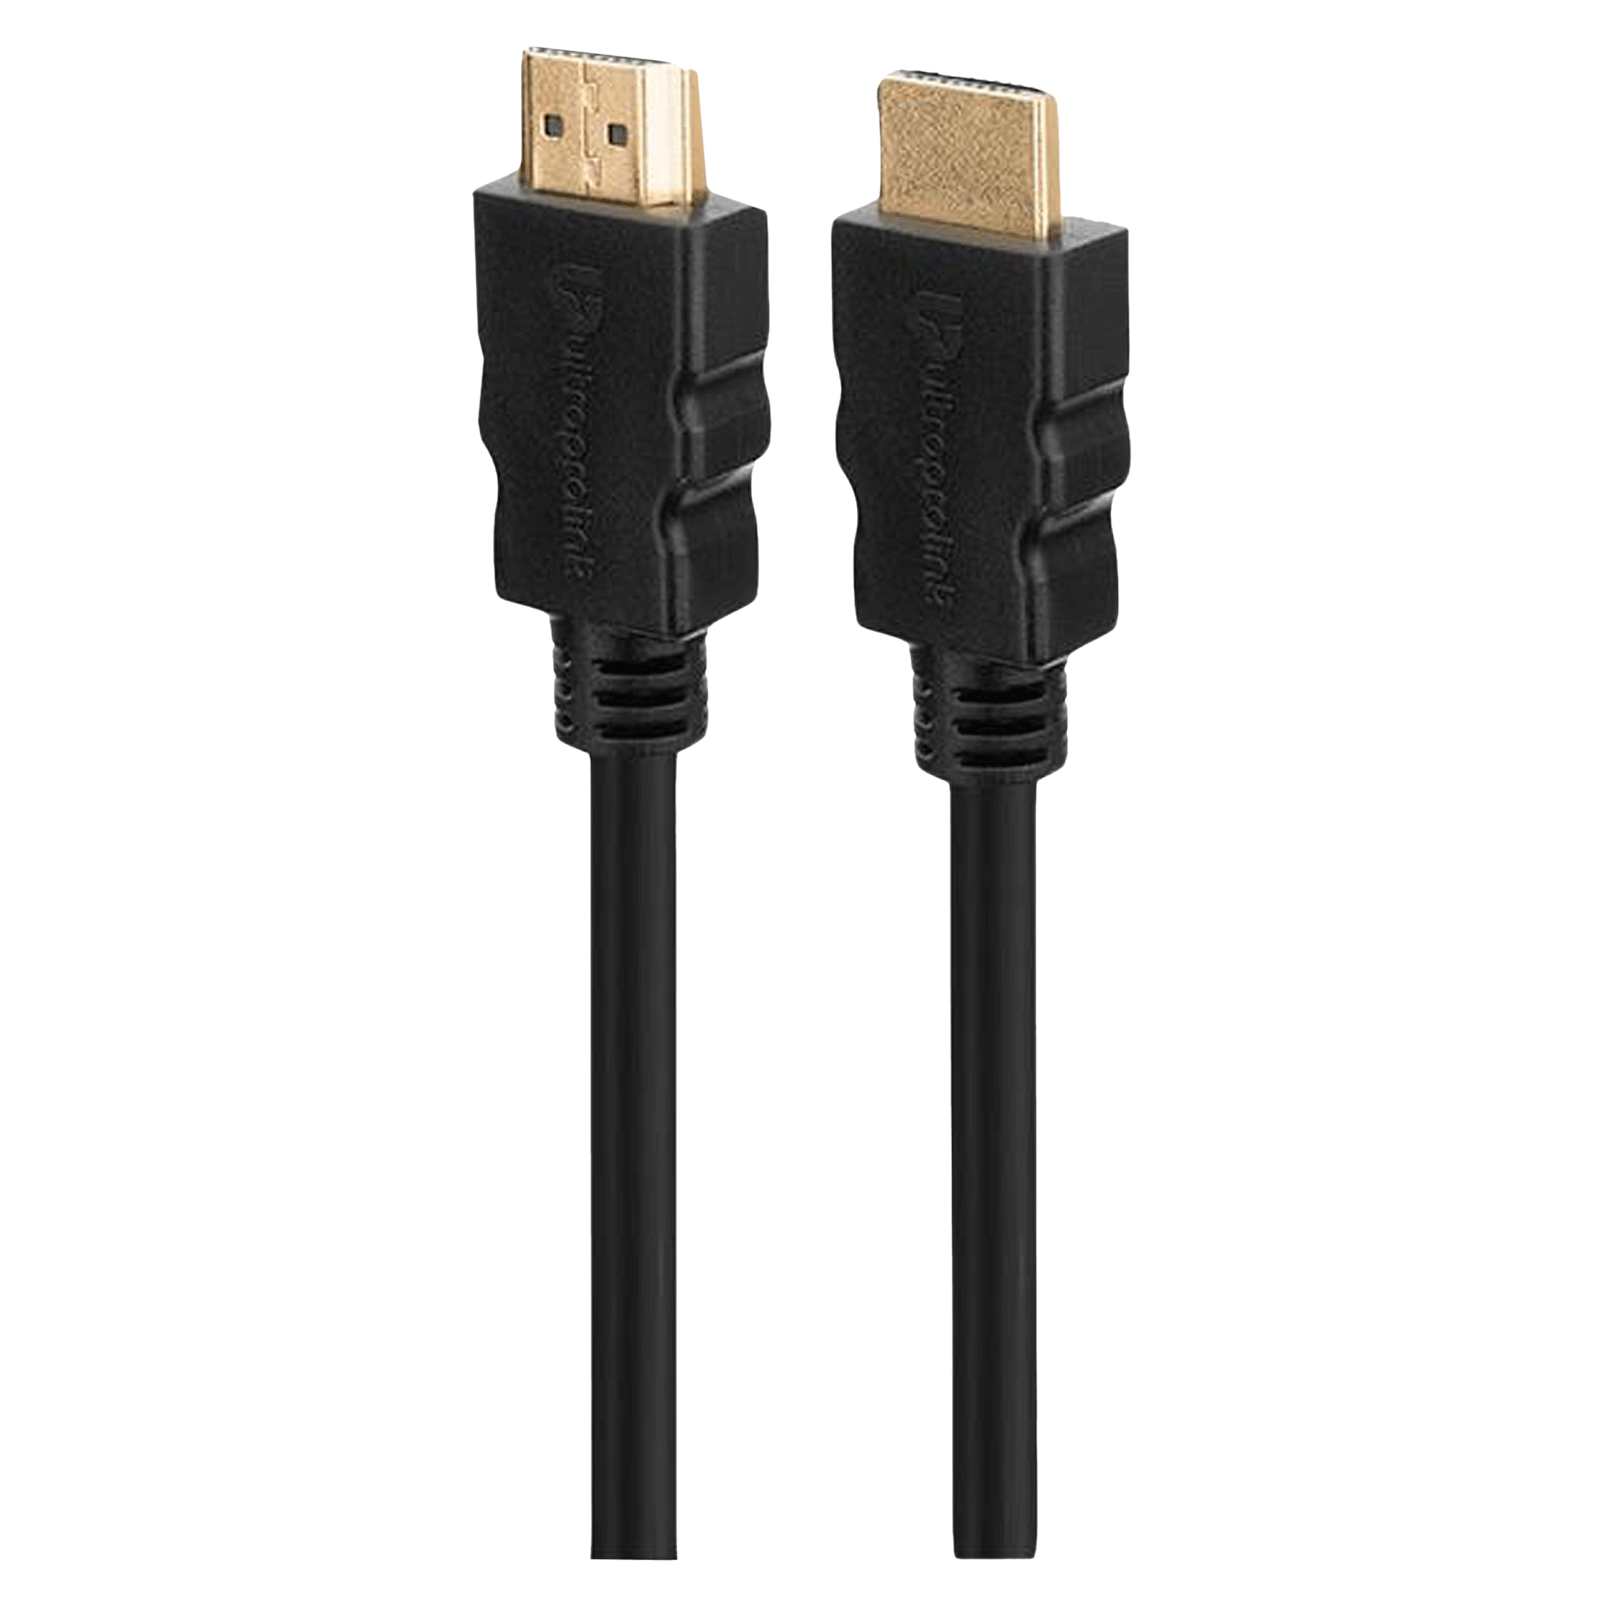 HDMI CABLES - HDMI Cable, Home Theater Accessories, HDMI Products